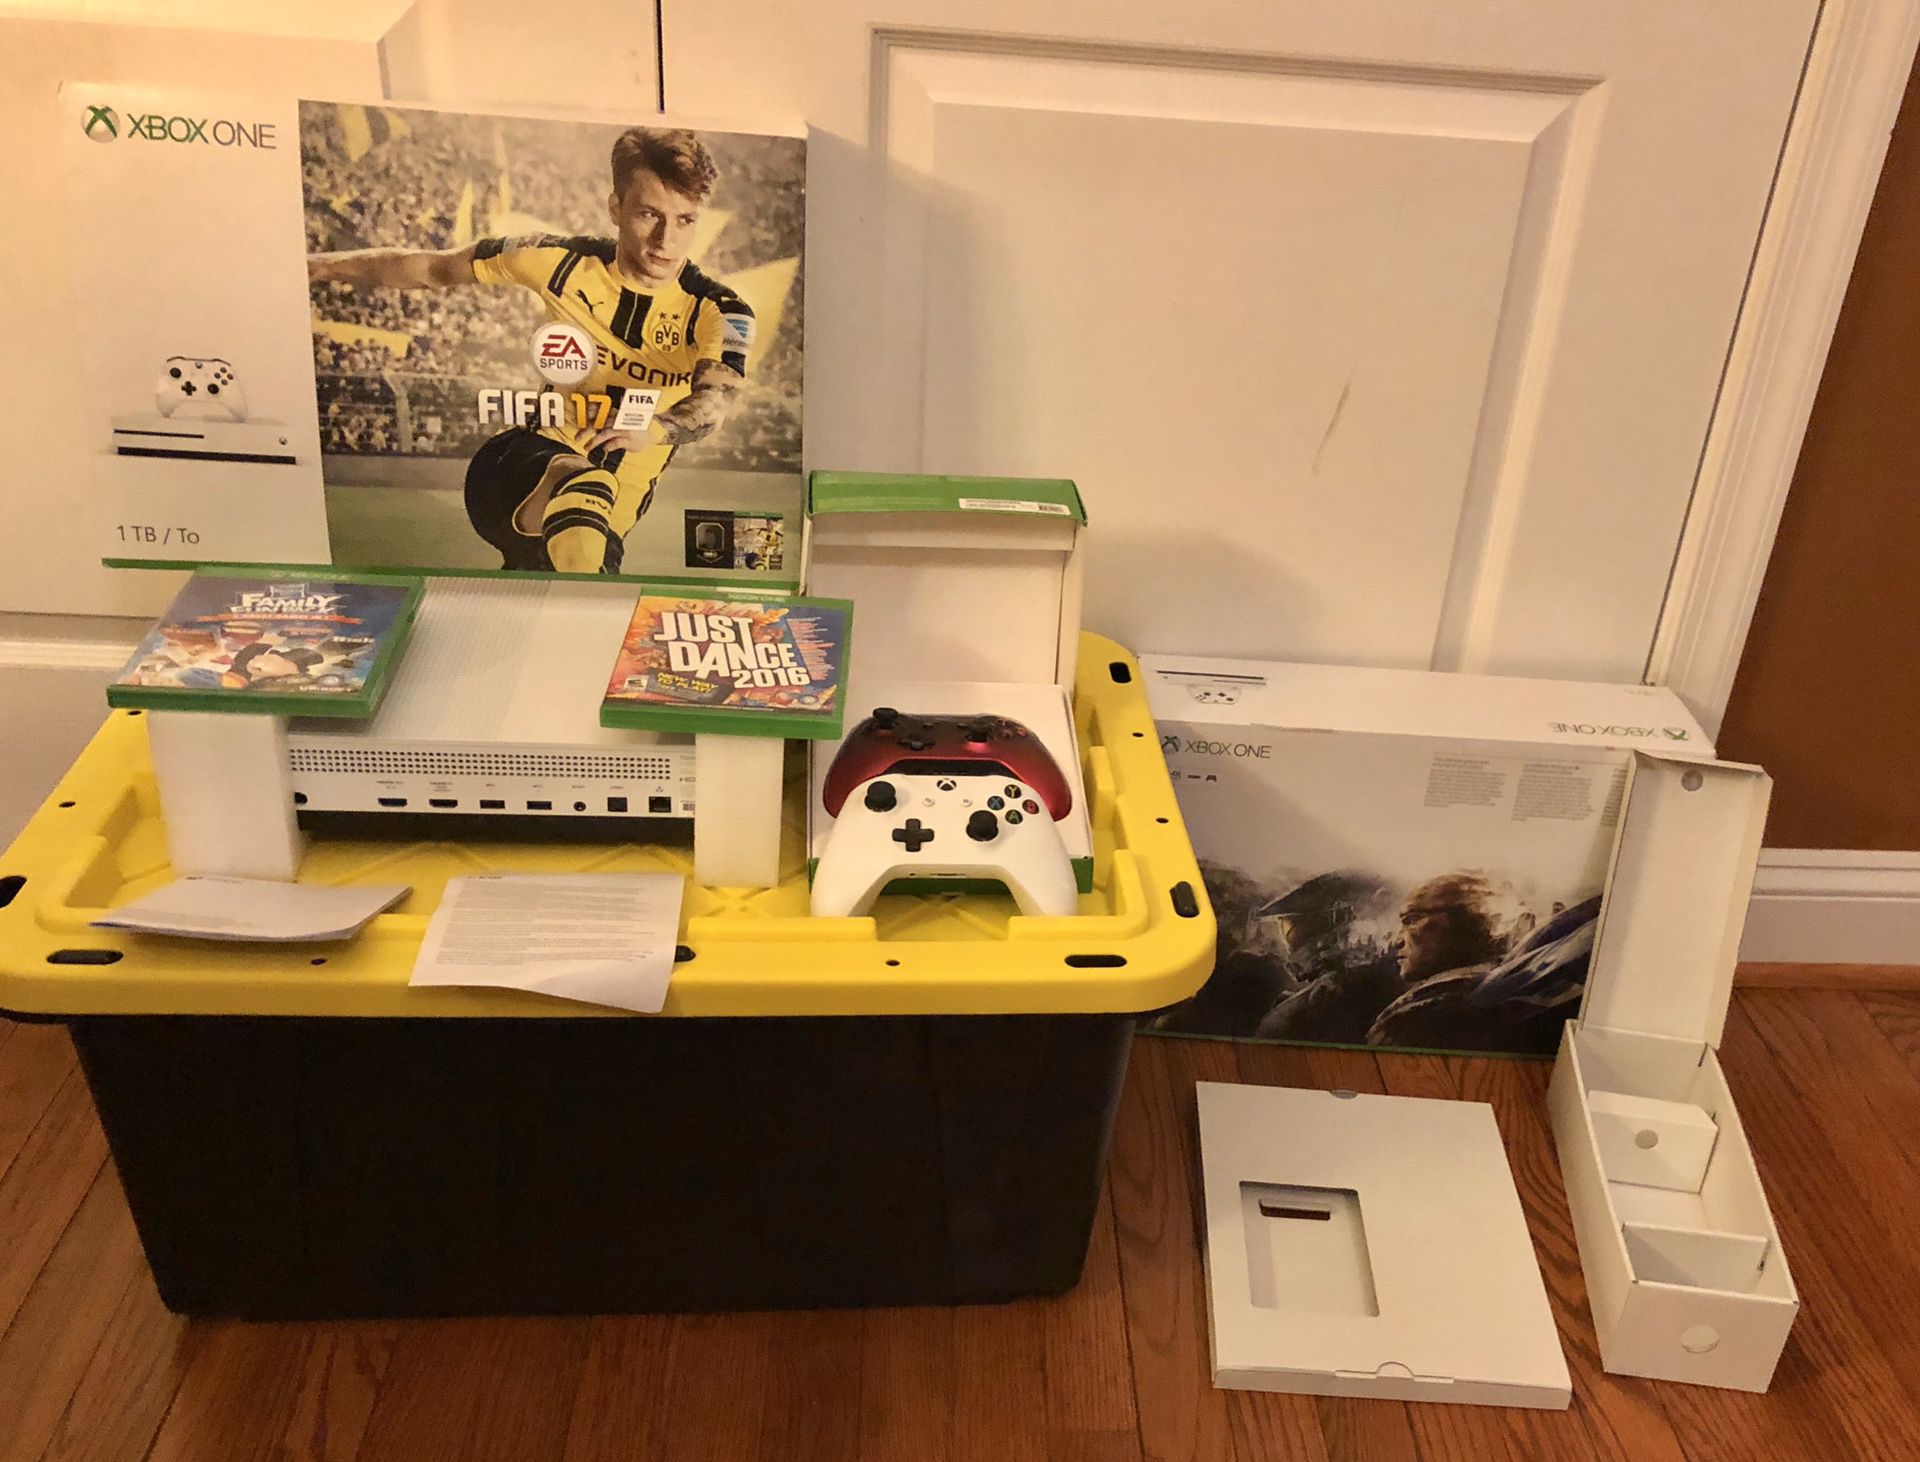 Microsoft XBOX ONE S 1TB / To Console (White) with FIFA 17 Rare Players Pack FIFA 17